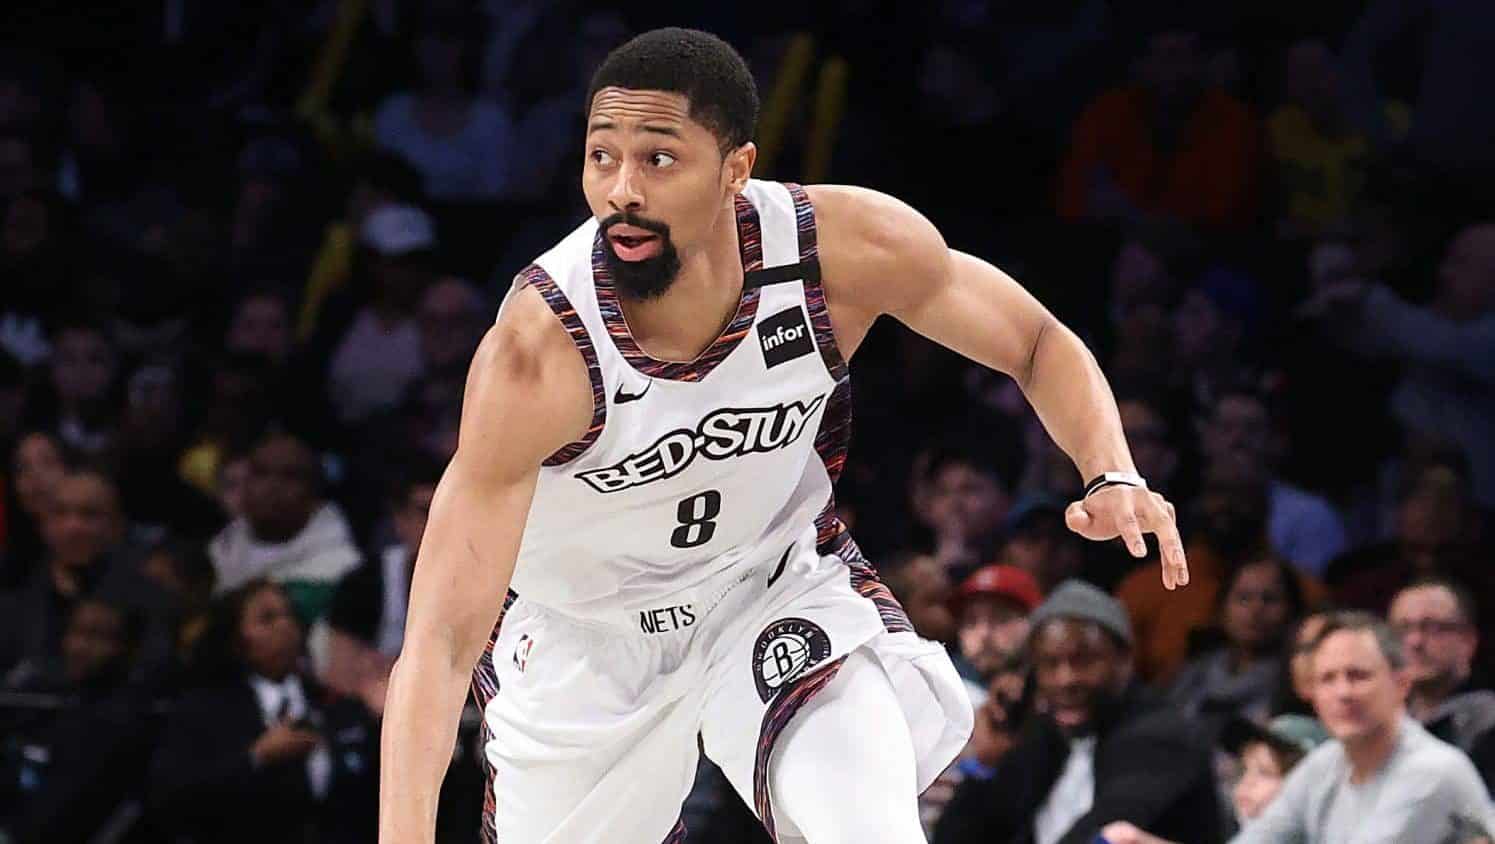 NEW YORK, NEW YORK - JANUARY 18: Spencer Dinwiddie #8 of the Brooklyn Nets in action against the Milwaukee Bucks during their game at Barclays Center on January 18, 2020 in New York City. NOTE TO USER: User expressly acknowledges and agrees that, by downloading and/or using this photograph, user is consenting to the terms and conditions of the Getty Images License Agreement.